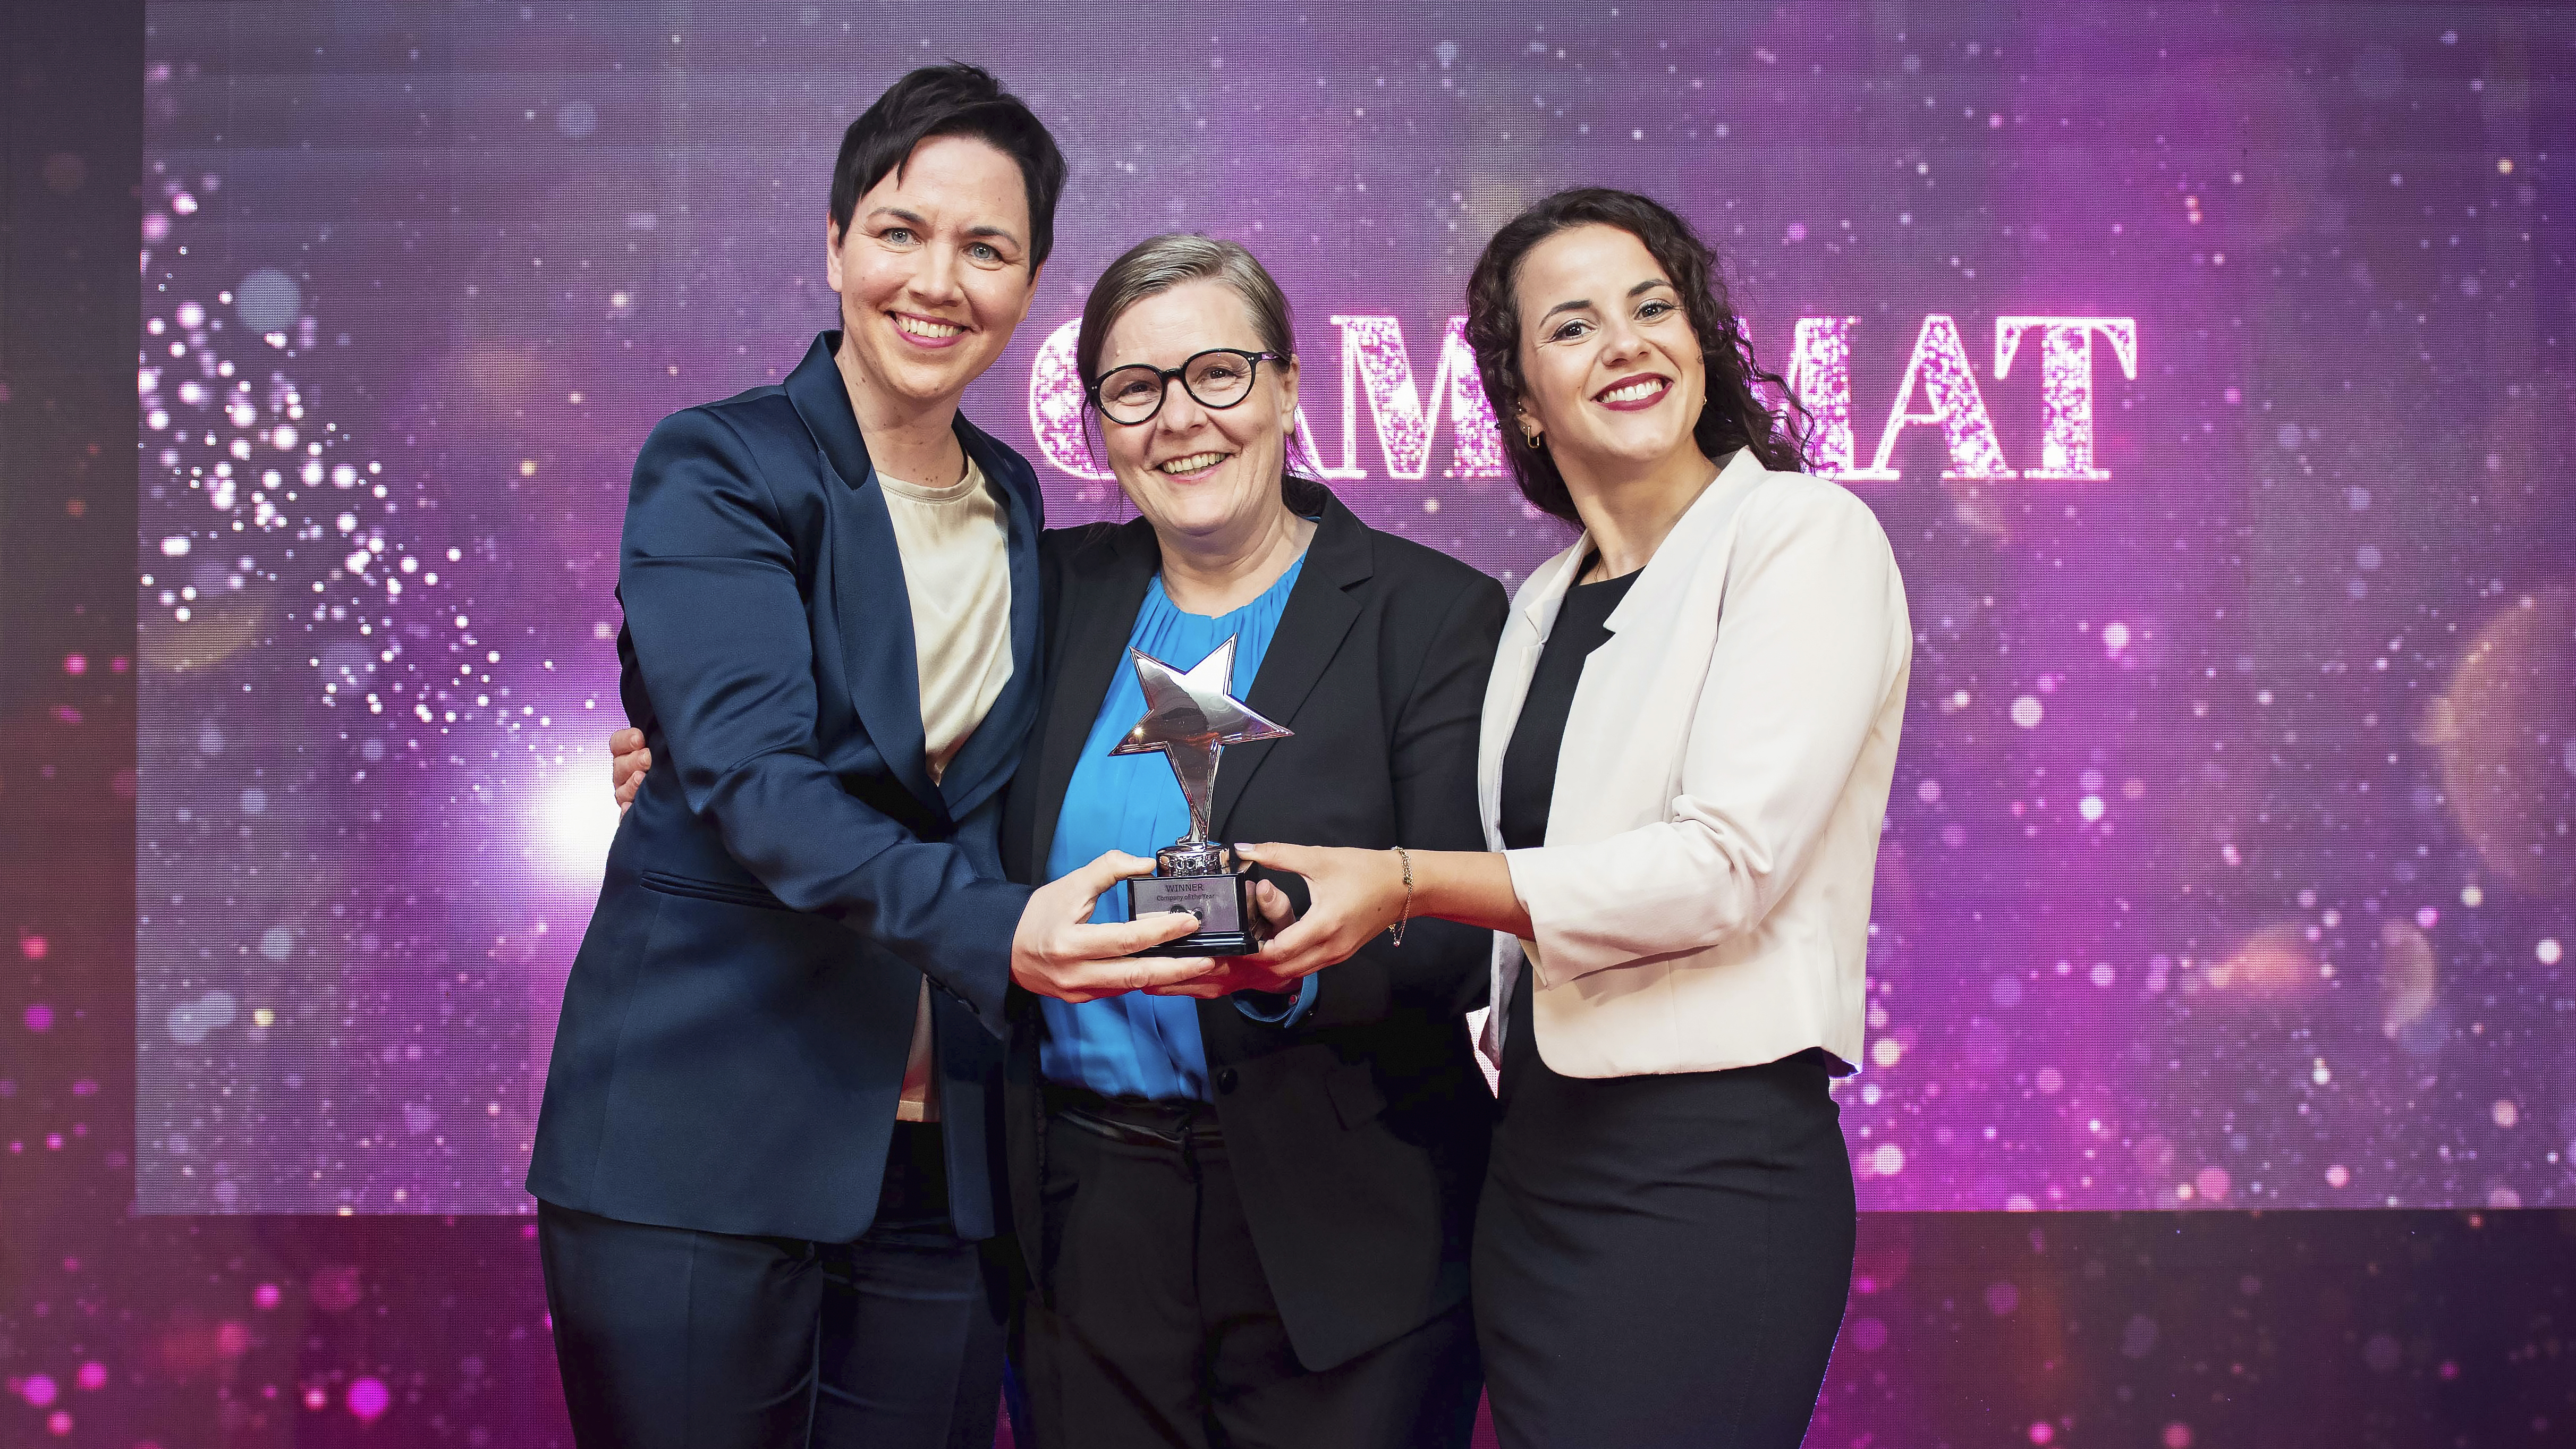 GAMOMAT named Company of the Year at the esteemed Women in Gaming Diversity Awards